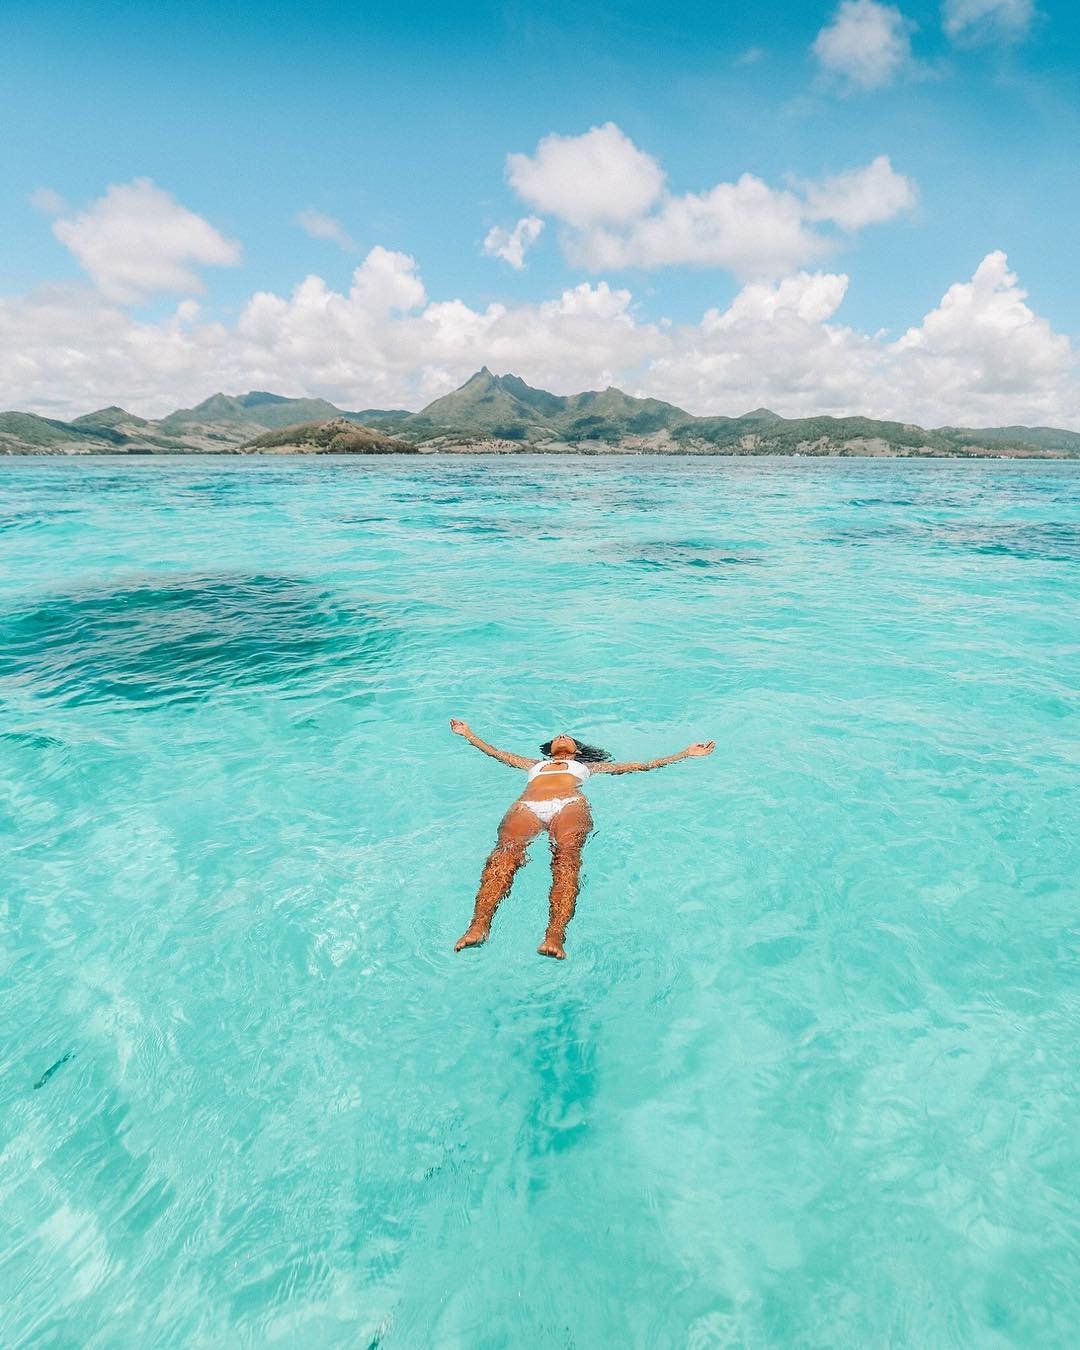 🌊💎 Ready to experience the clearest waters of Mauritius?

Don't wait any longer to book the excursion that will allow you to discover the largest lagoon in Mauritius with the most beautiful 5 islands you've ever seen.

We promise you won't regret i